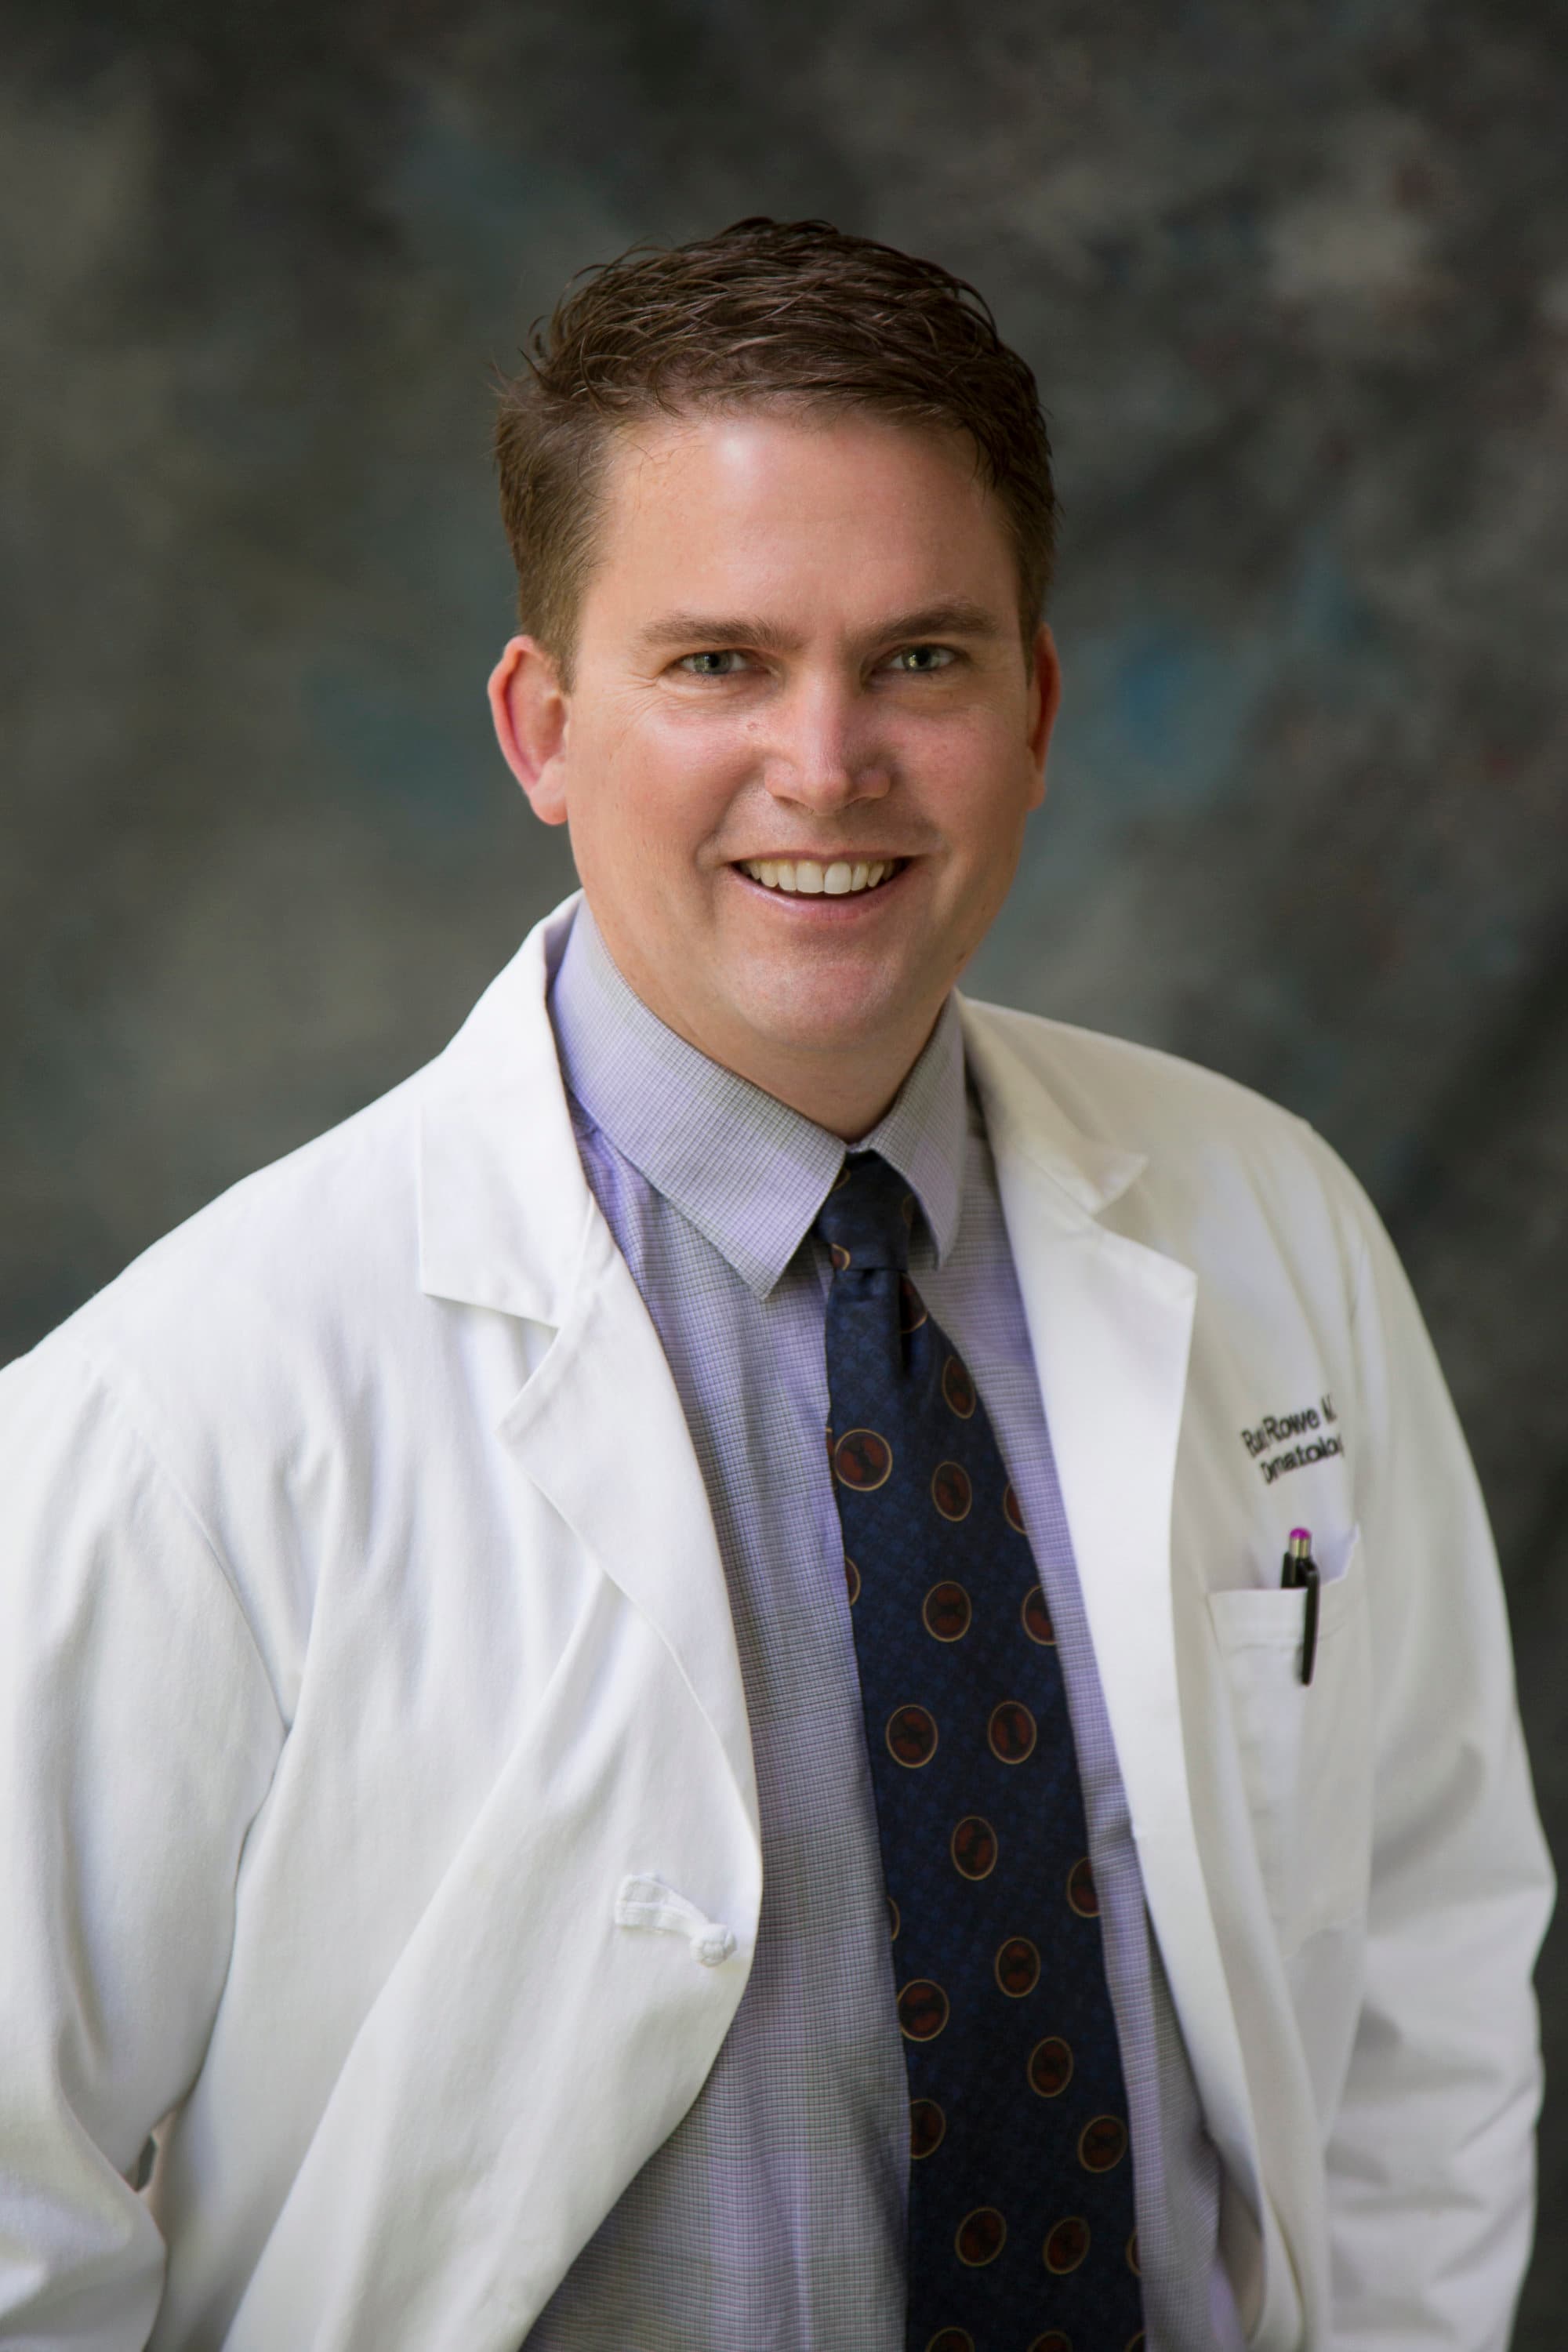 Dr. Russell Scott Rowe, MD